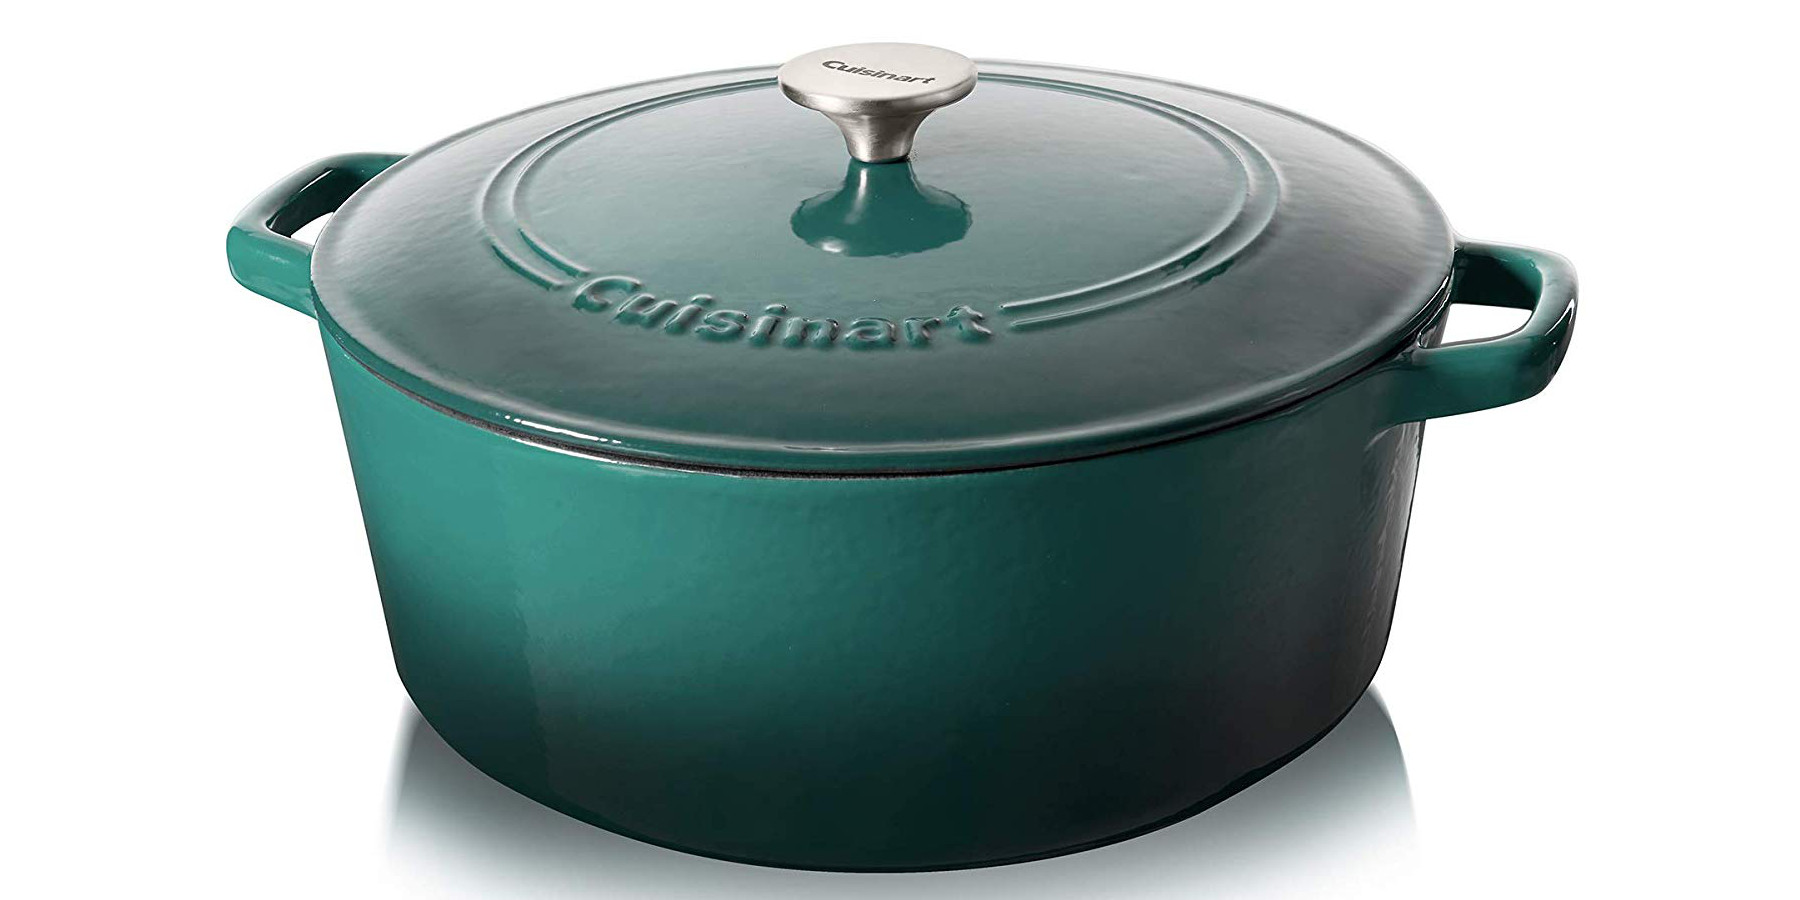 Cuisinart cast iron 7-Qt. round casserole now $60 for today only